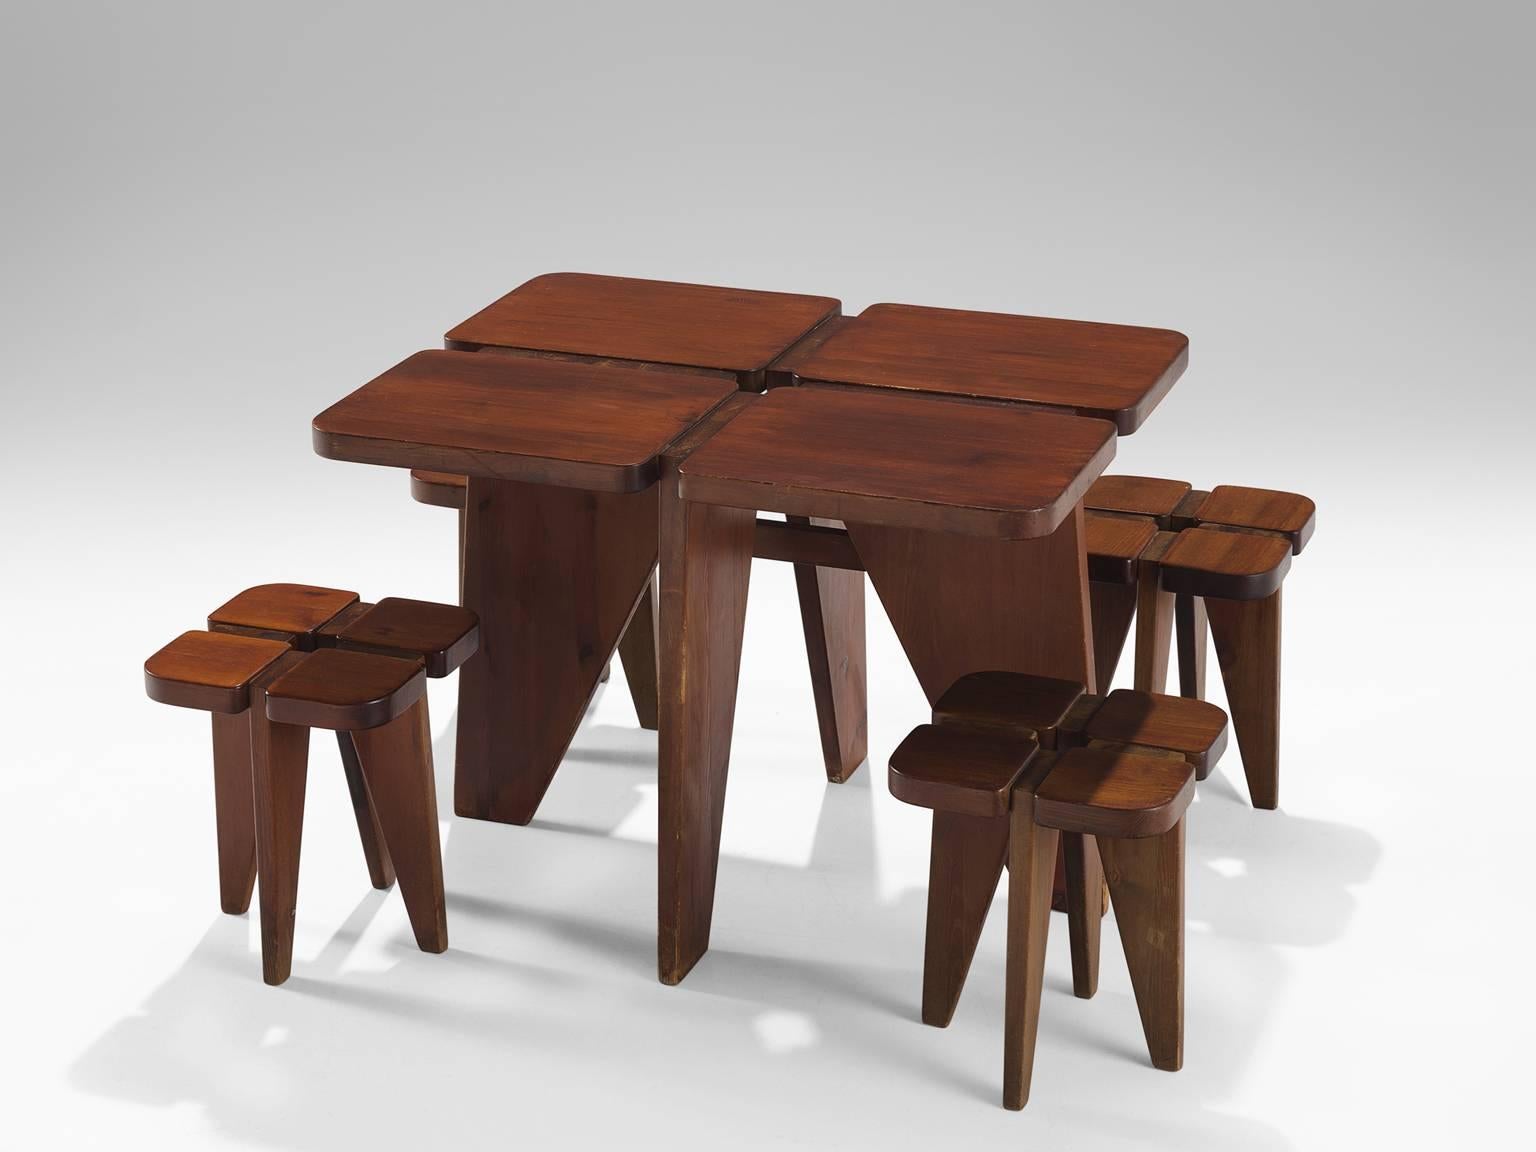 Lisa Johansson-Pape for Stockman Orno, table with stools, in stained pinewood, Finland, 1960s. 

This Finnish dining room set in dark stained pine consists of one table and four stools that all feature a clover-like top. The stools are an exact copy